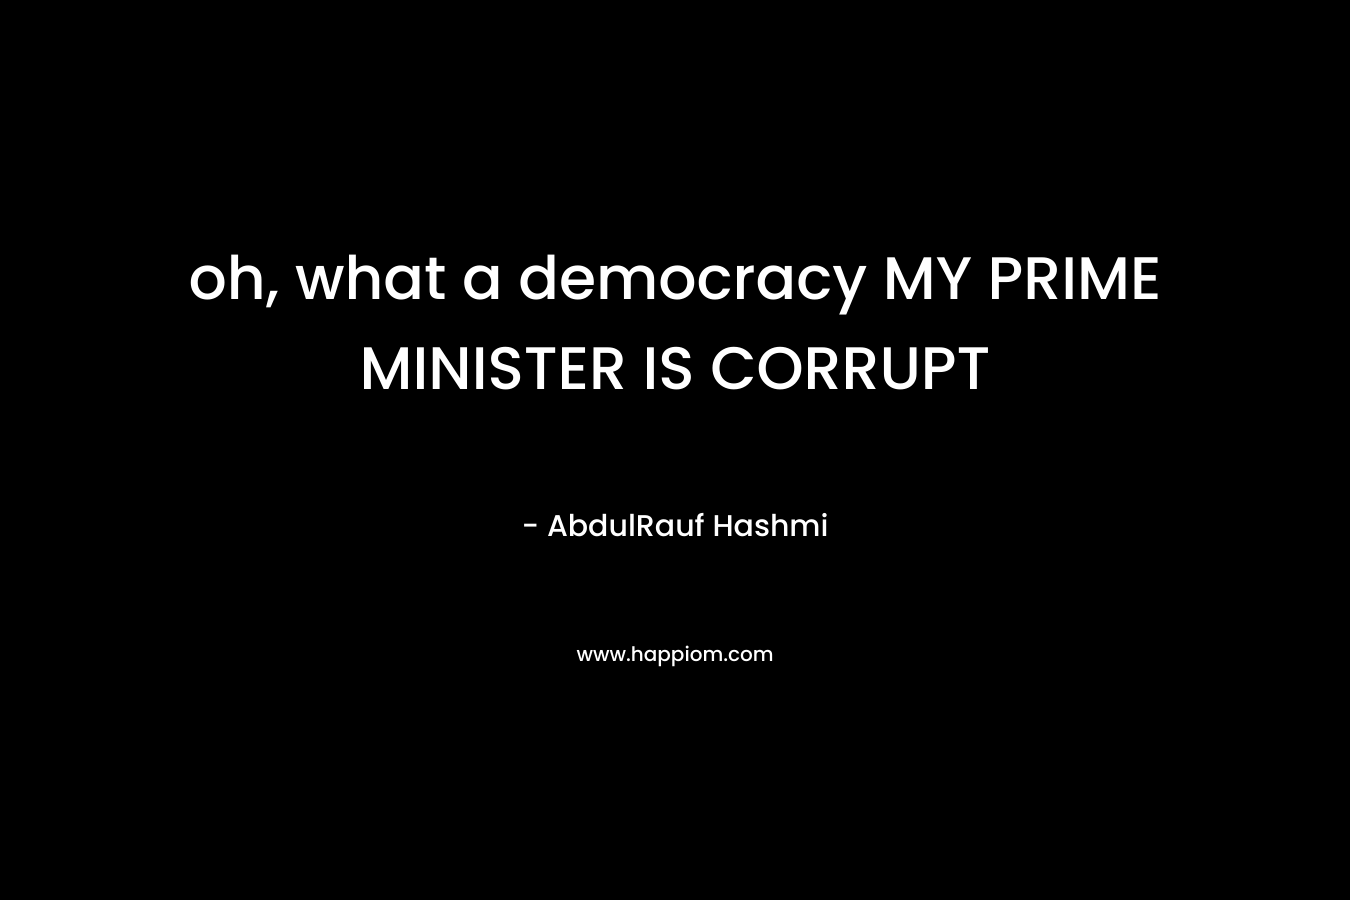 oh, what a democracy MY PRIME MINISTER IS CORRUPT